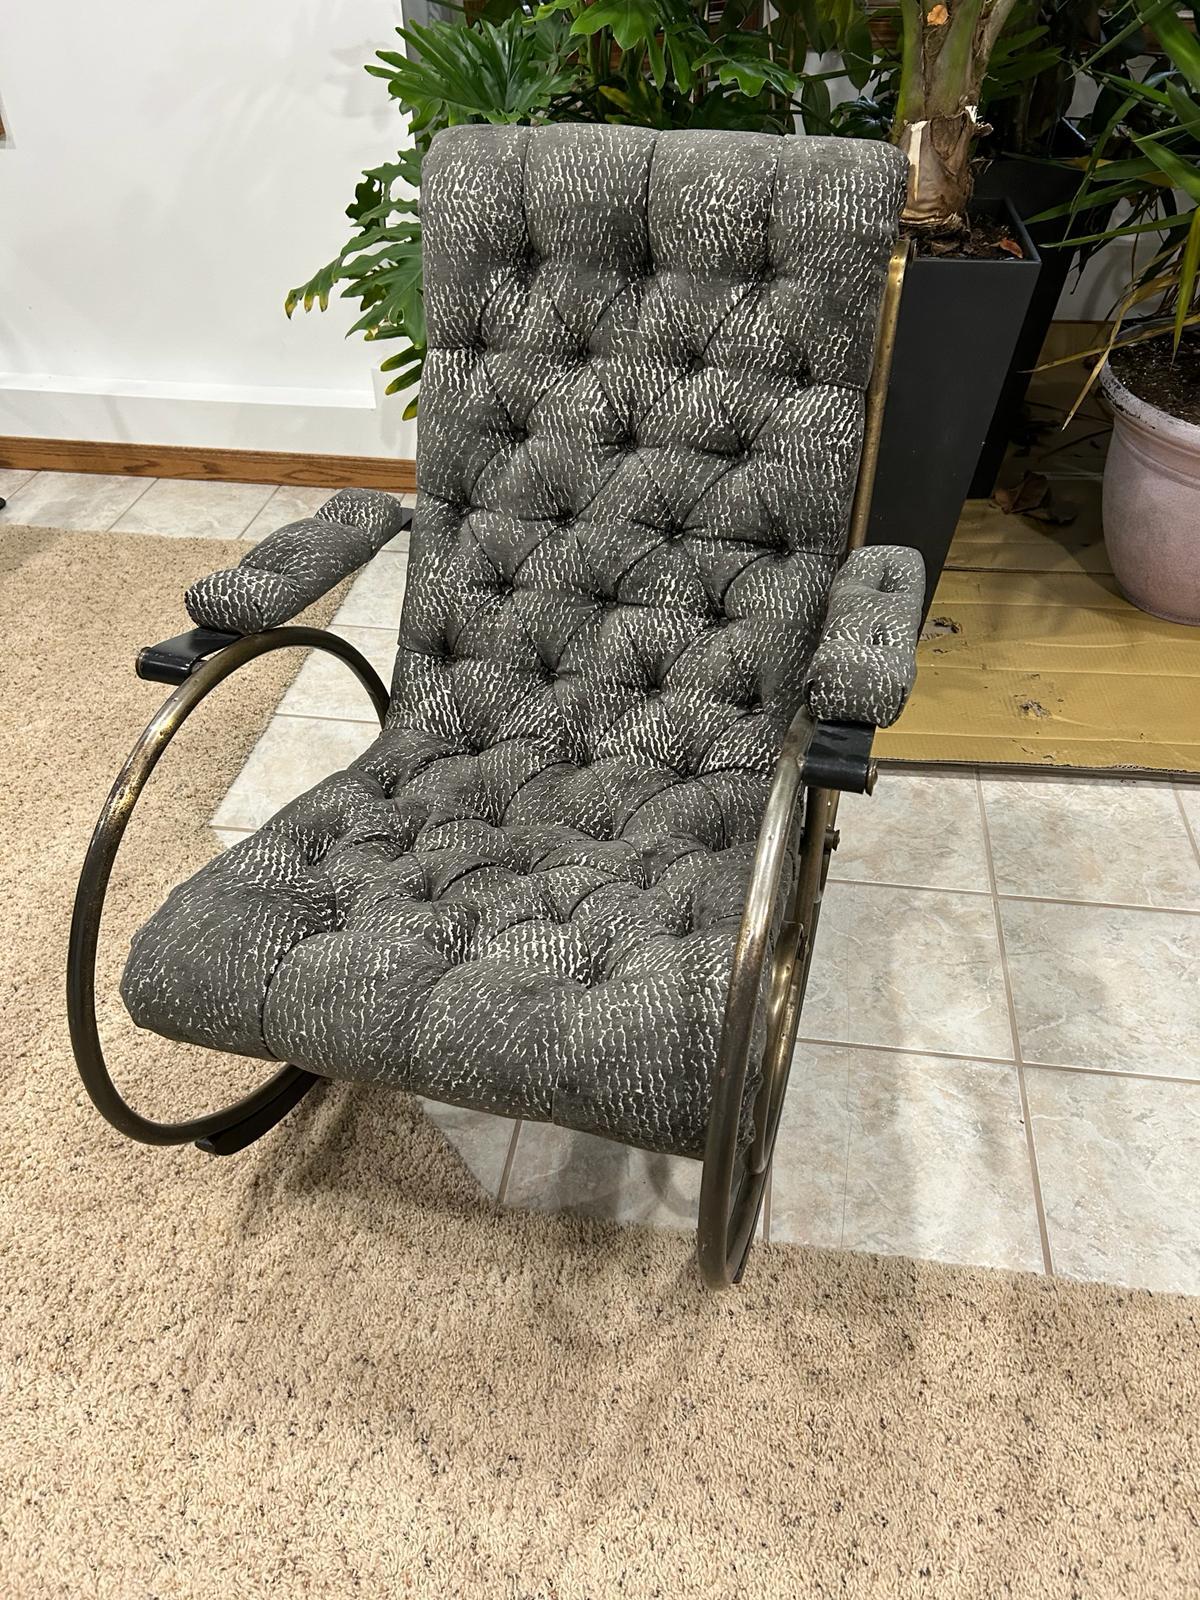 Mid-Century Lee Woodward Tufted Sculptural Rocking Chair in a printed charcoal textured chenille. Beautiful tubular brass frame with sensational lines. Upholstered and matching tufted body and arms. Original Mfg label is not shown as it is newly